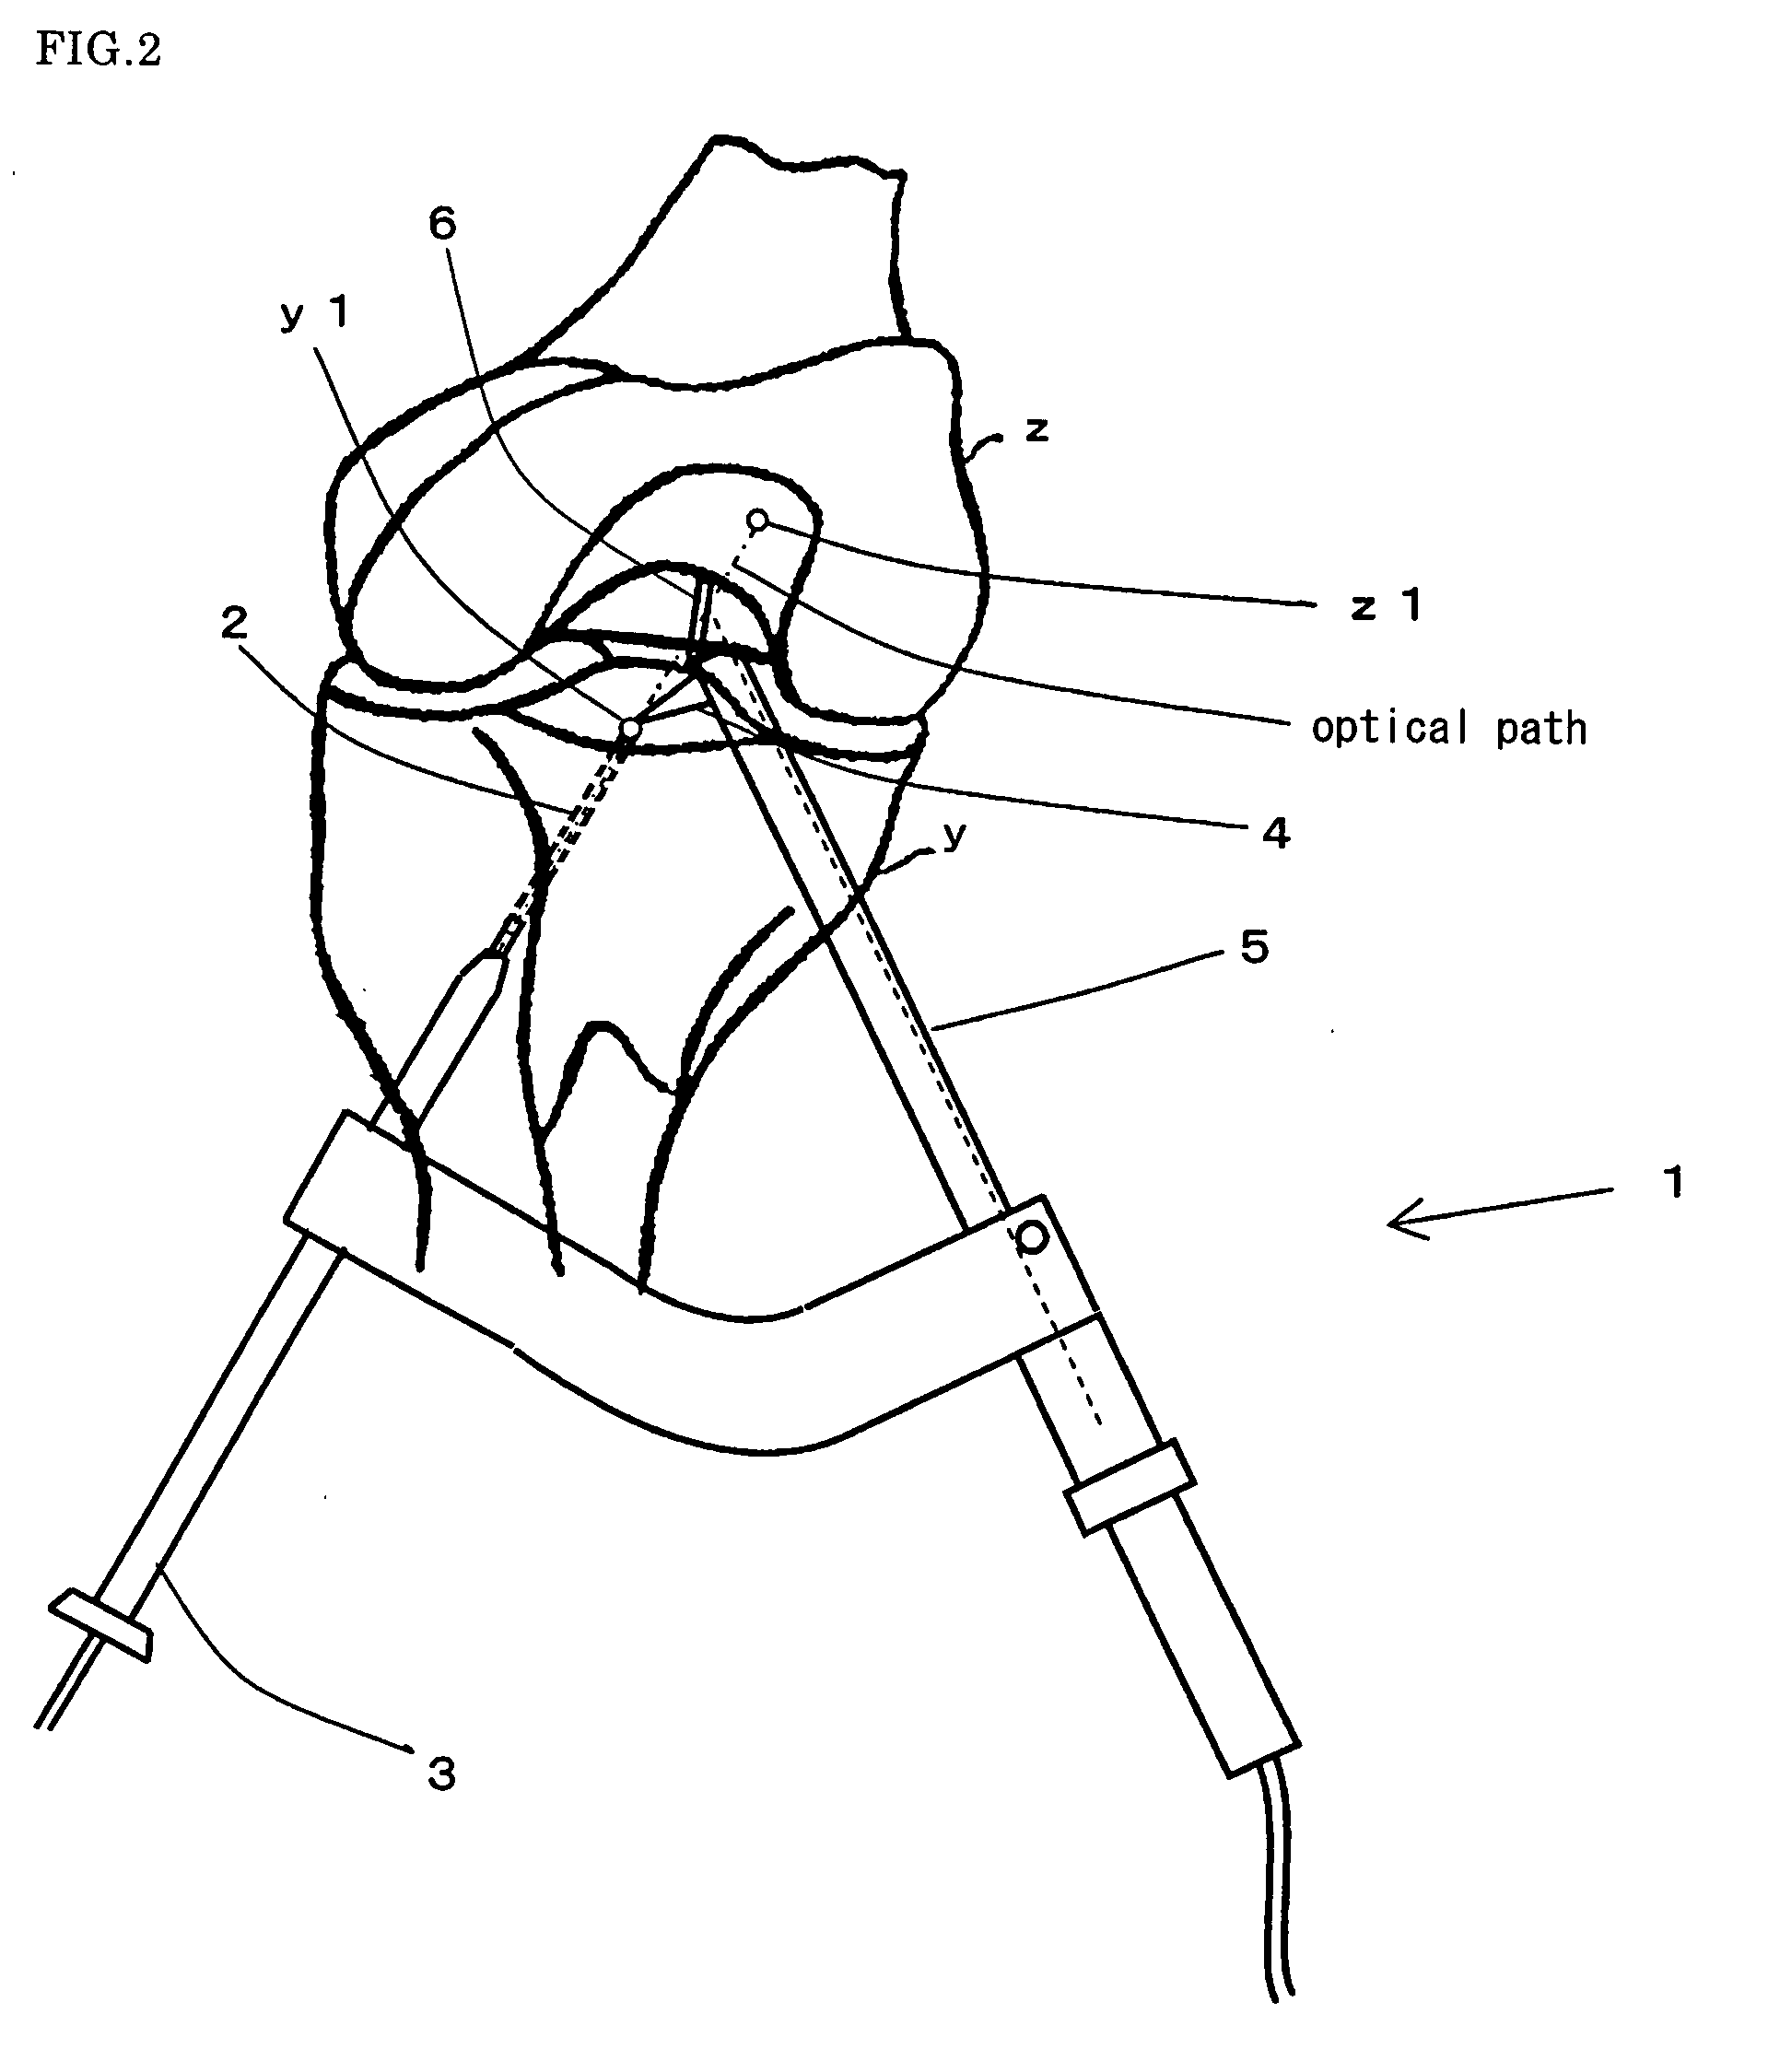 Drill guide for anterior cruciate ligament reconstruction operation